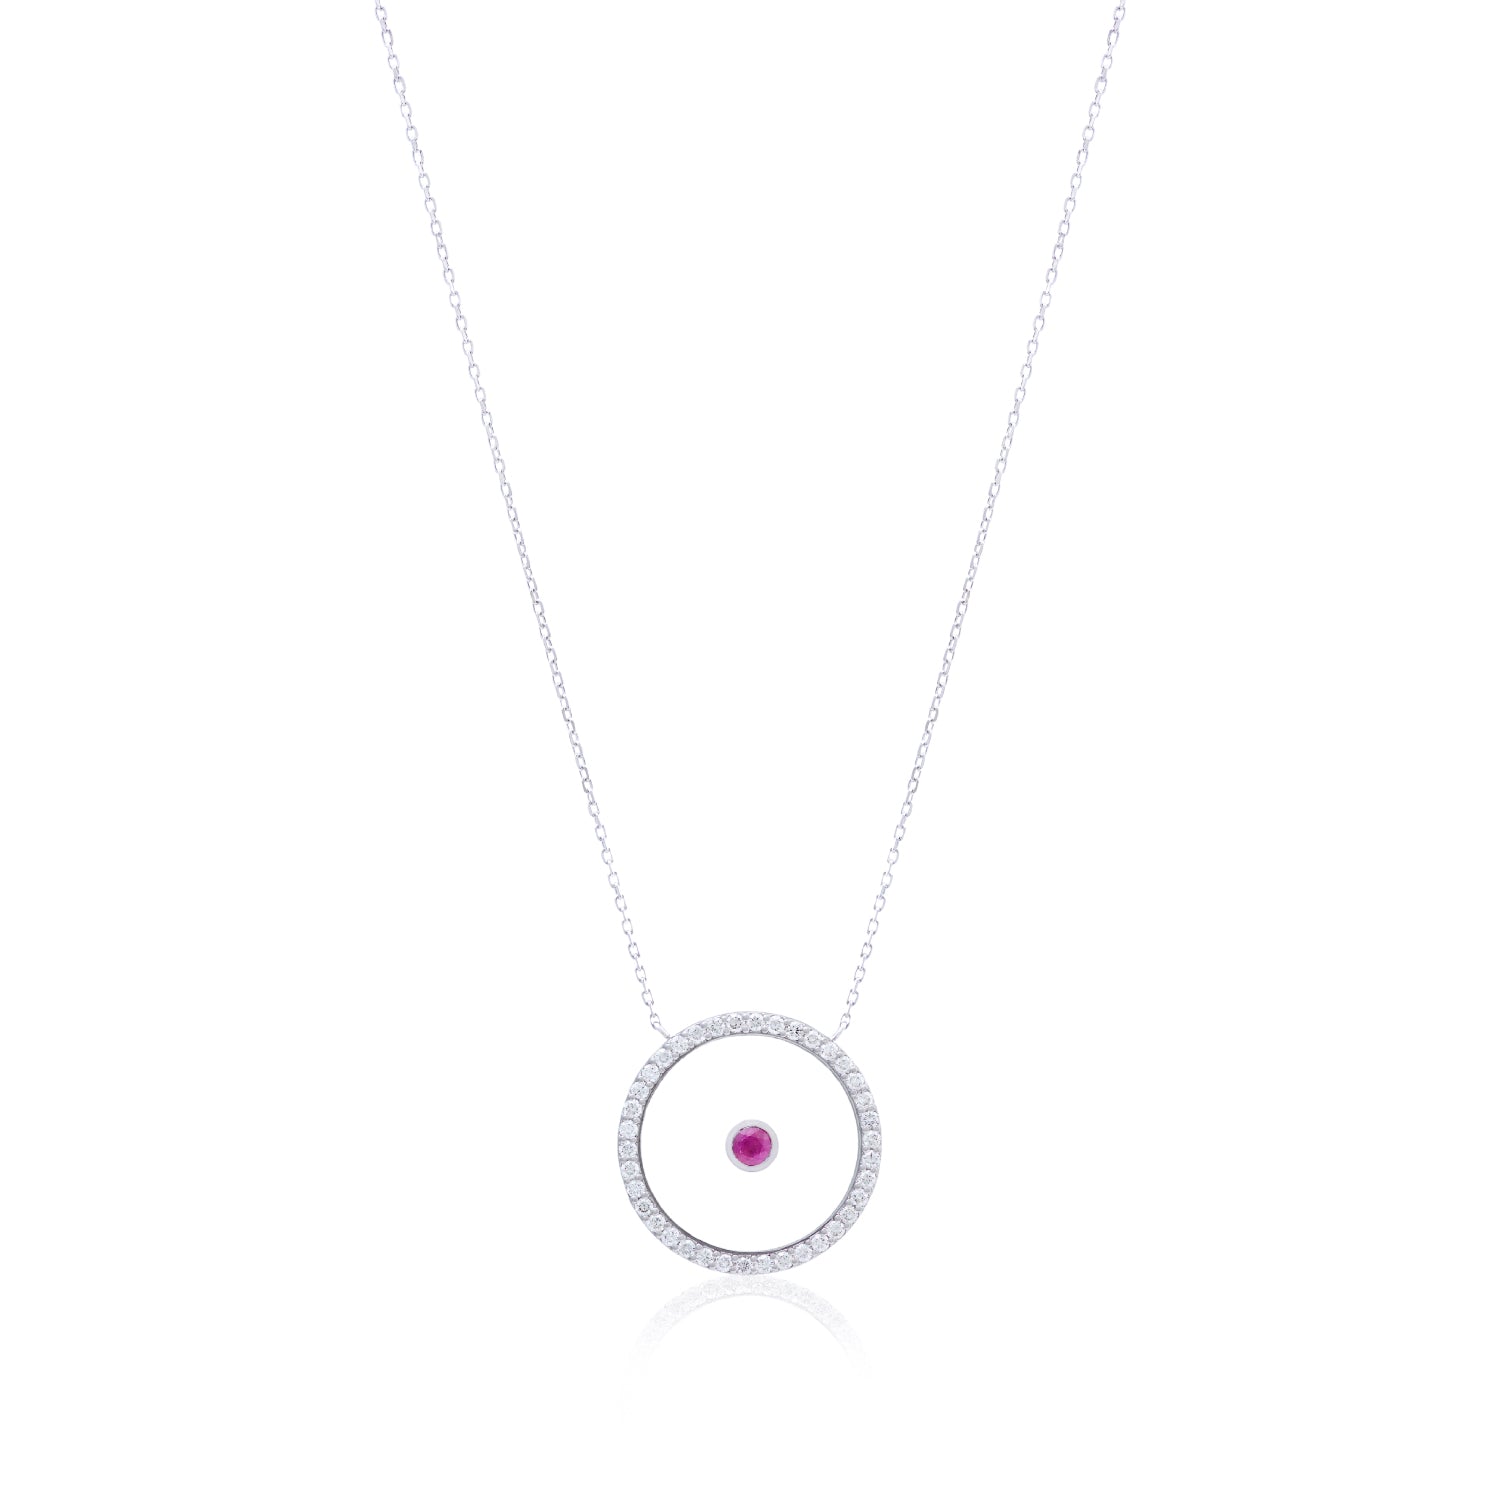 Ruby July Birthstone Necklace in White Gold